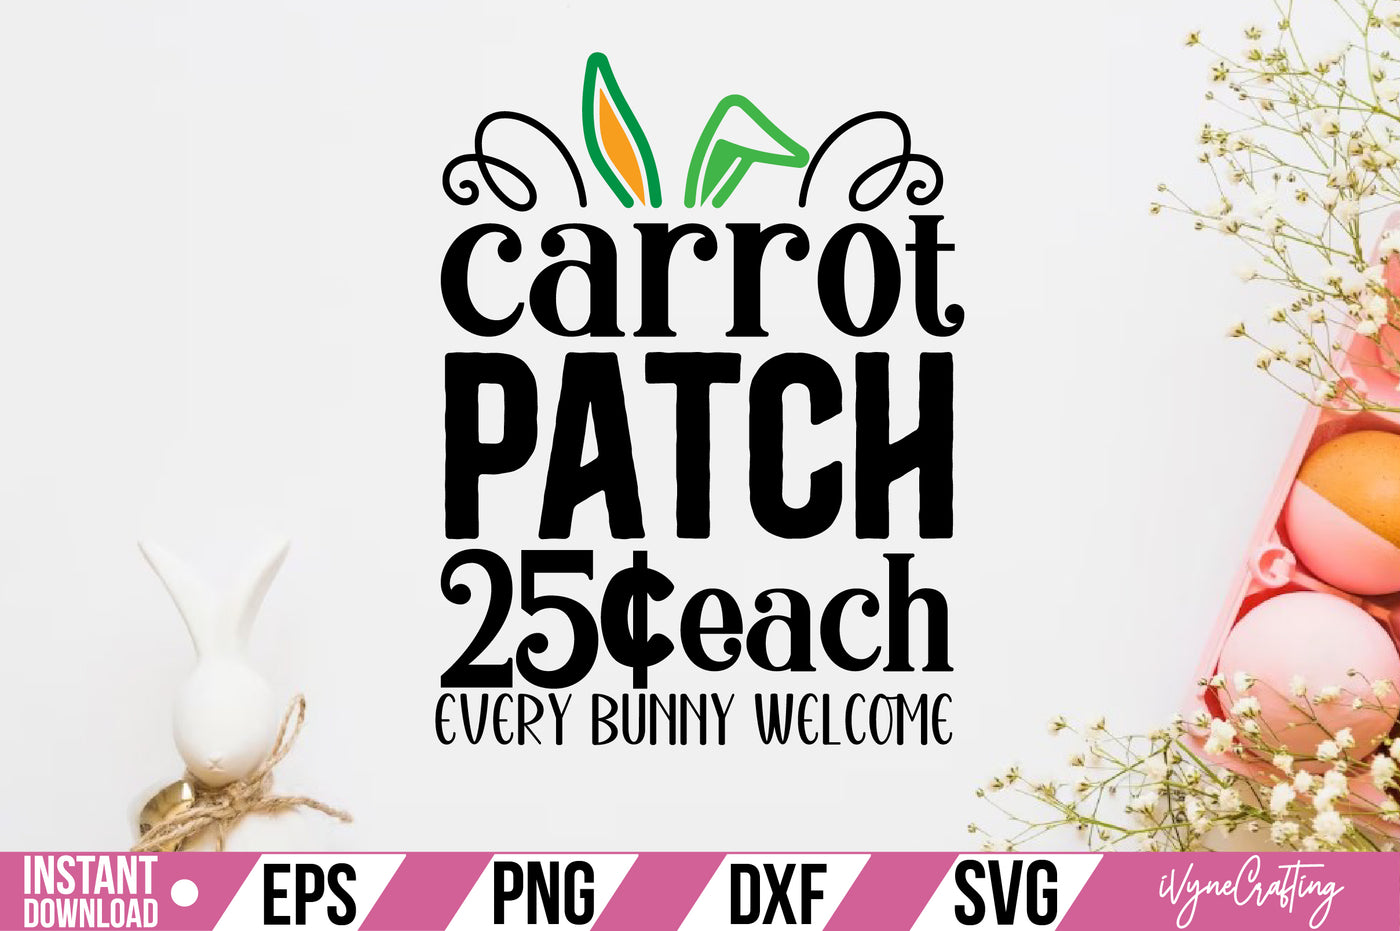 carrot patch 25 each every bunny welcome SVG Cut File